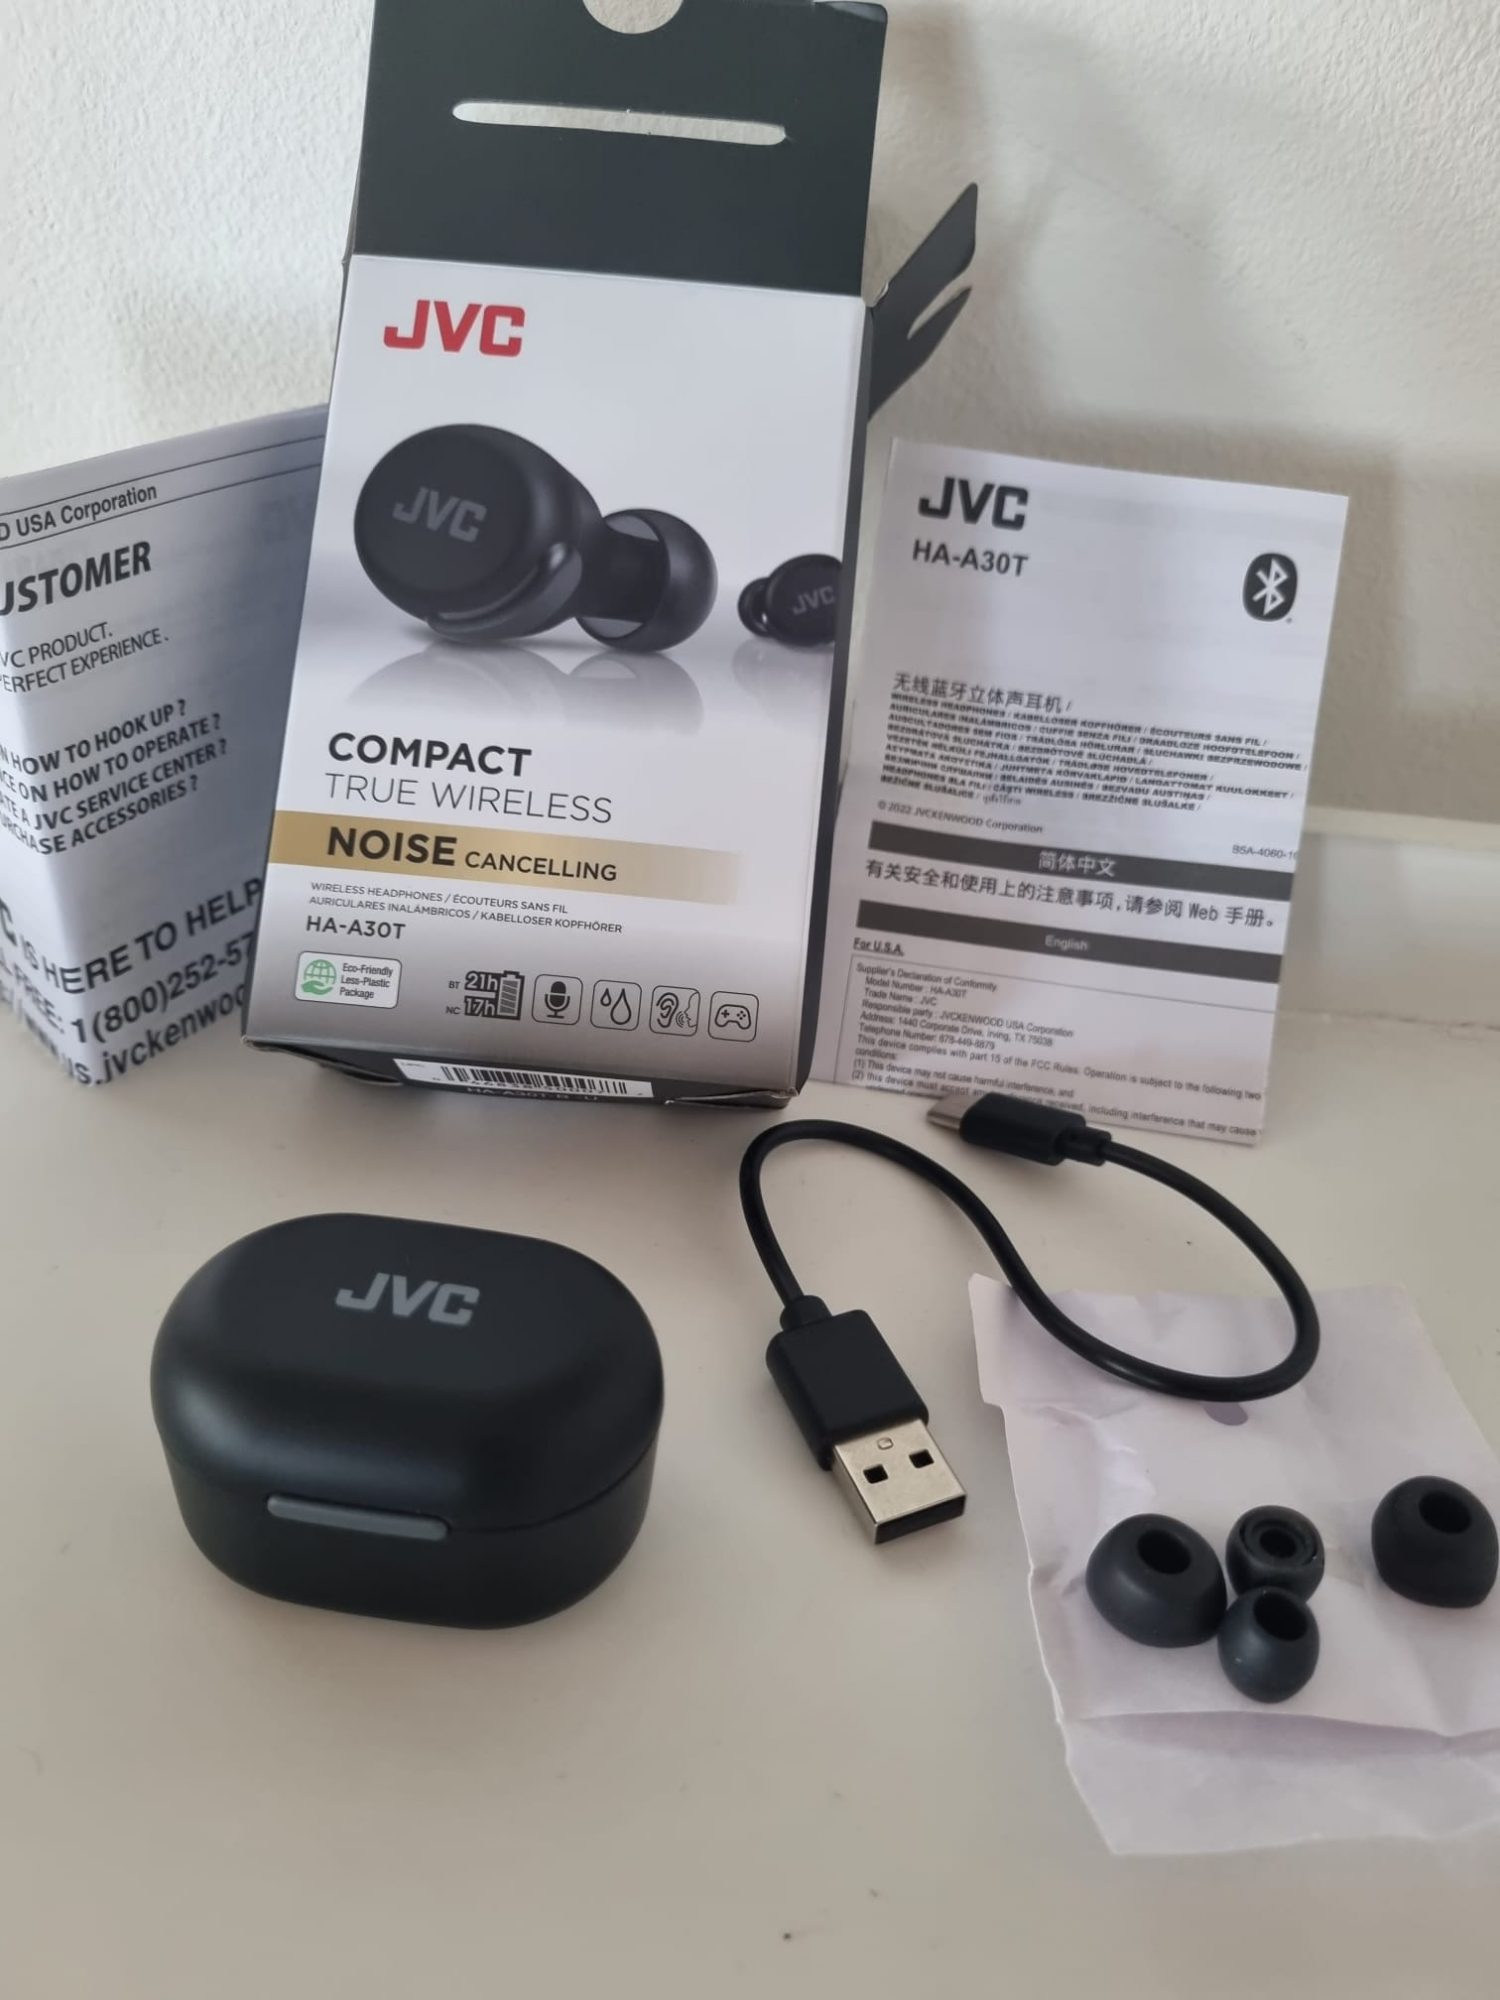 JVC HA-A30T review: great quality, small size